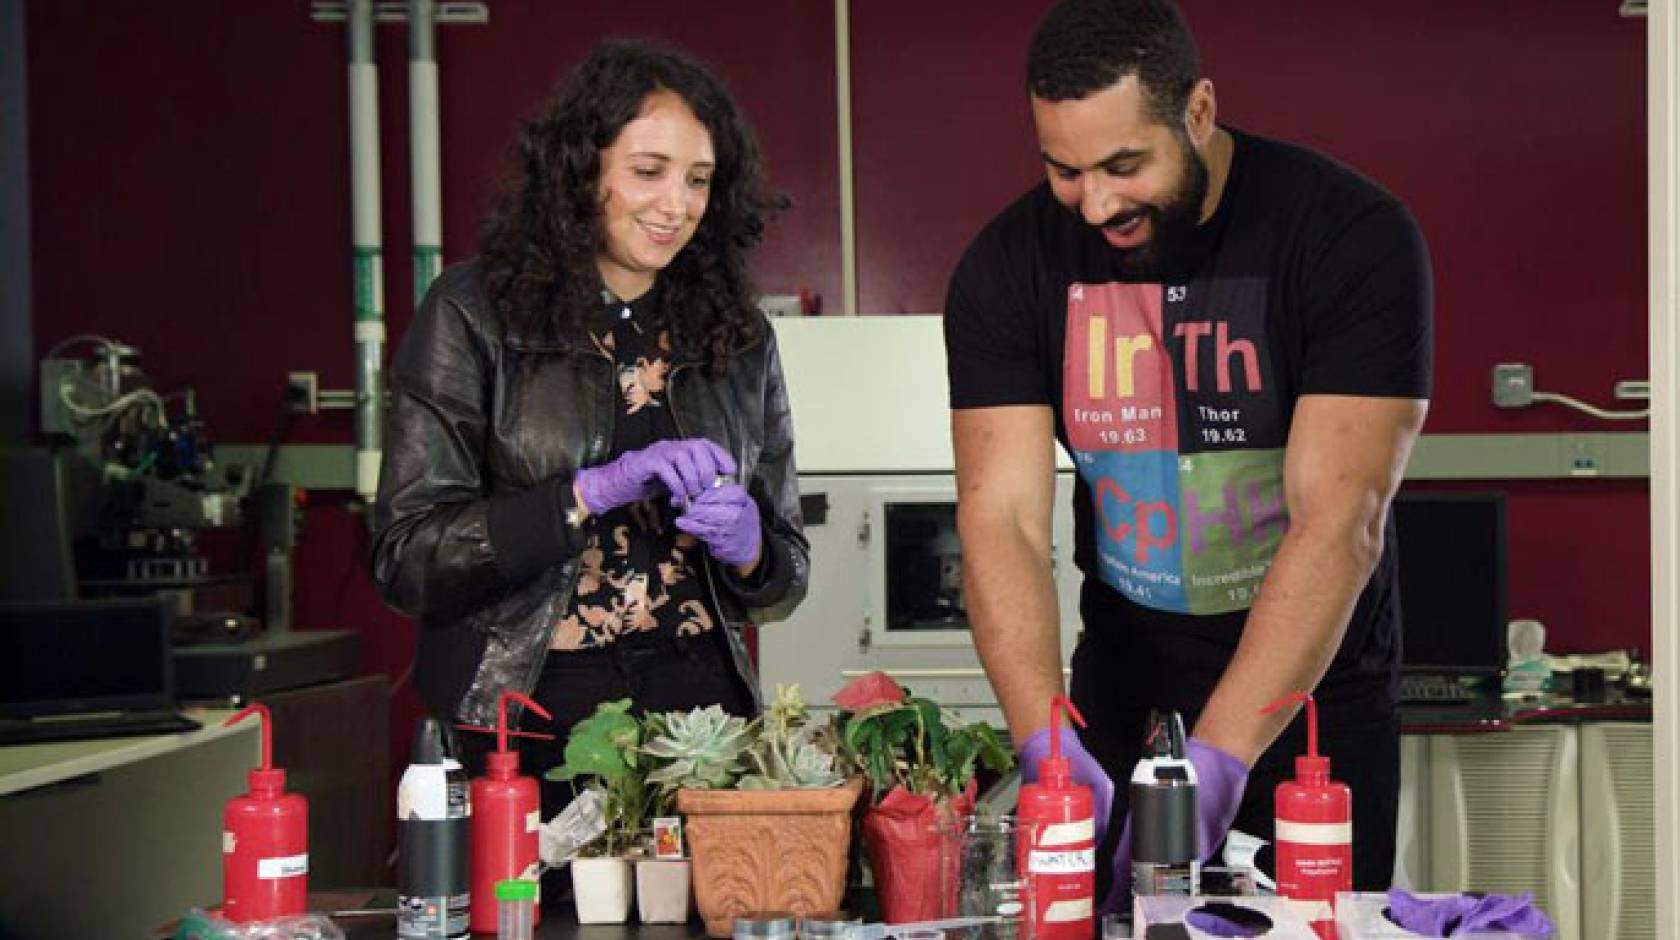 A man and a woman conduct a scientific experiment